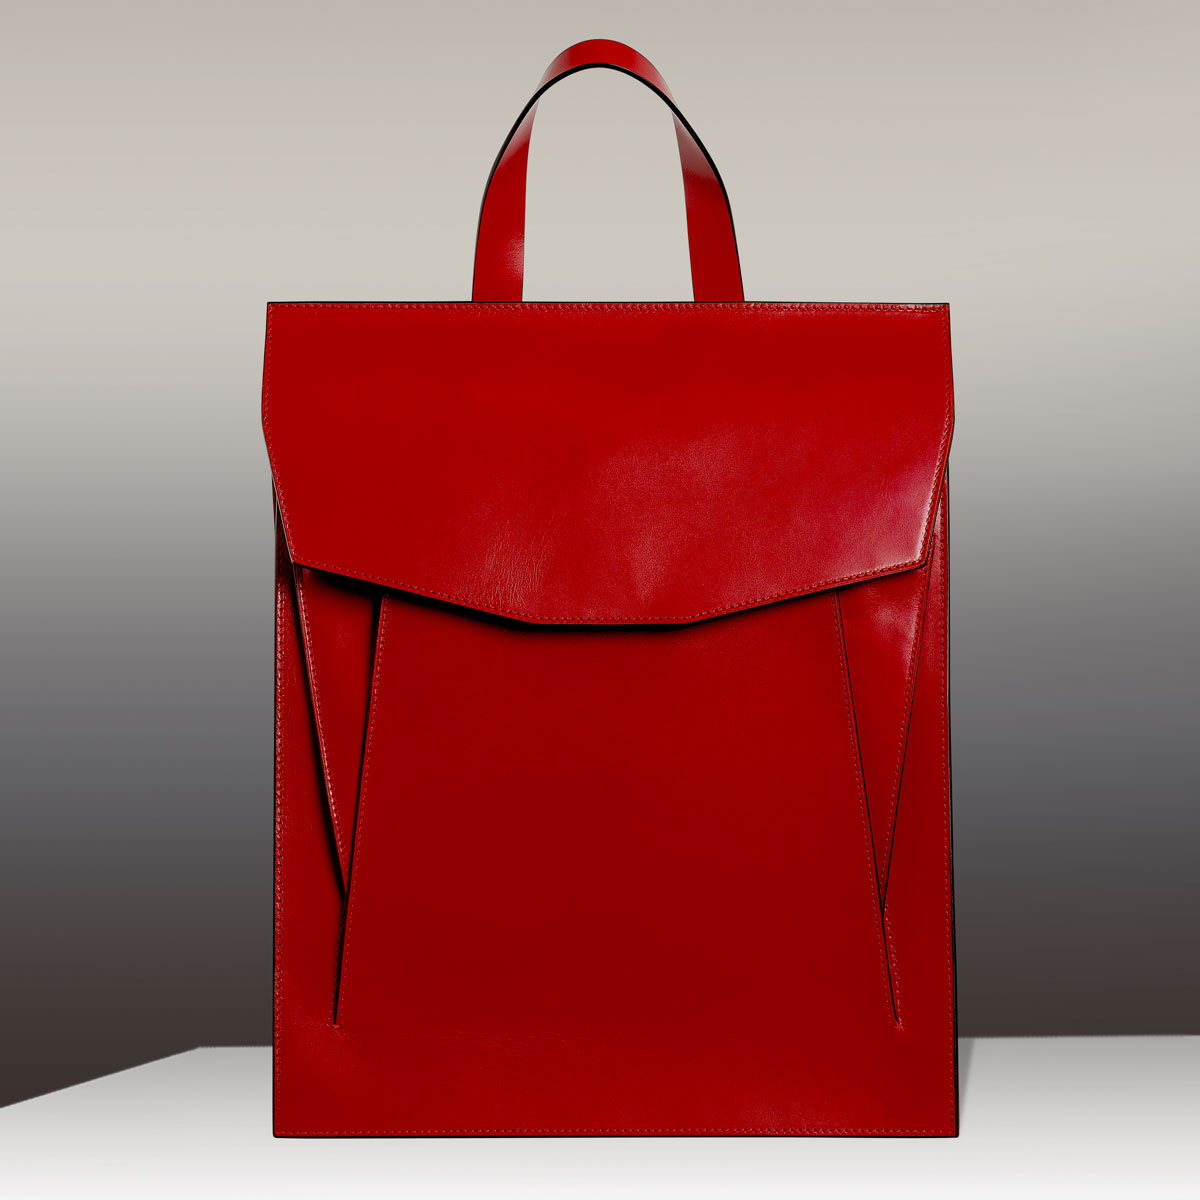 Merryl Tielman, Claudie bag: a convertible backpack/tote with adjustable/removable back straps and handles. Made in Italy, vegetable tanned cow leather, colour red.